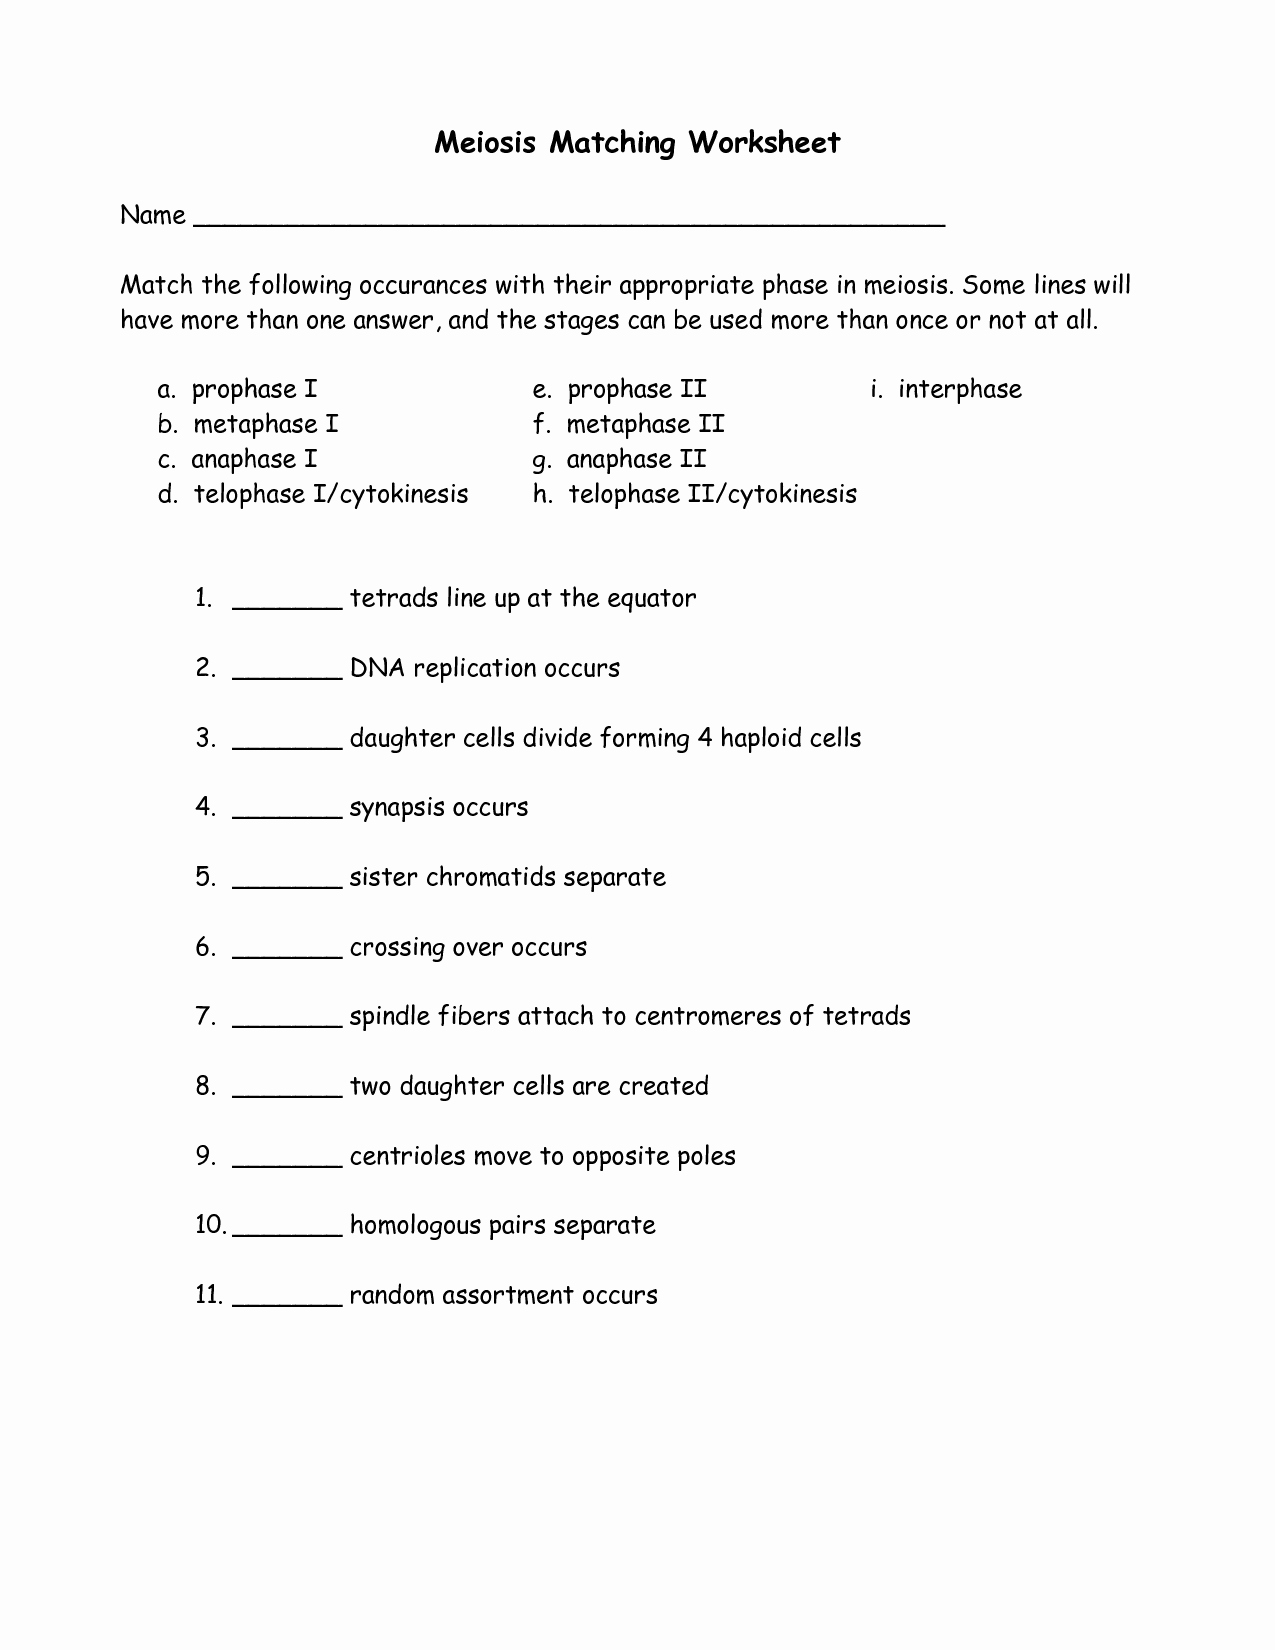 Frog Dissection Worksheet Answer Key Luxury Virtual Frog Dissection Worksheet Answer Key